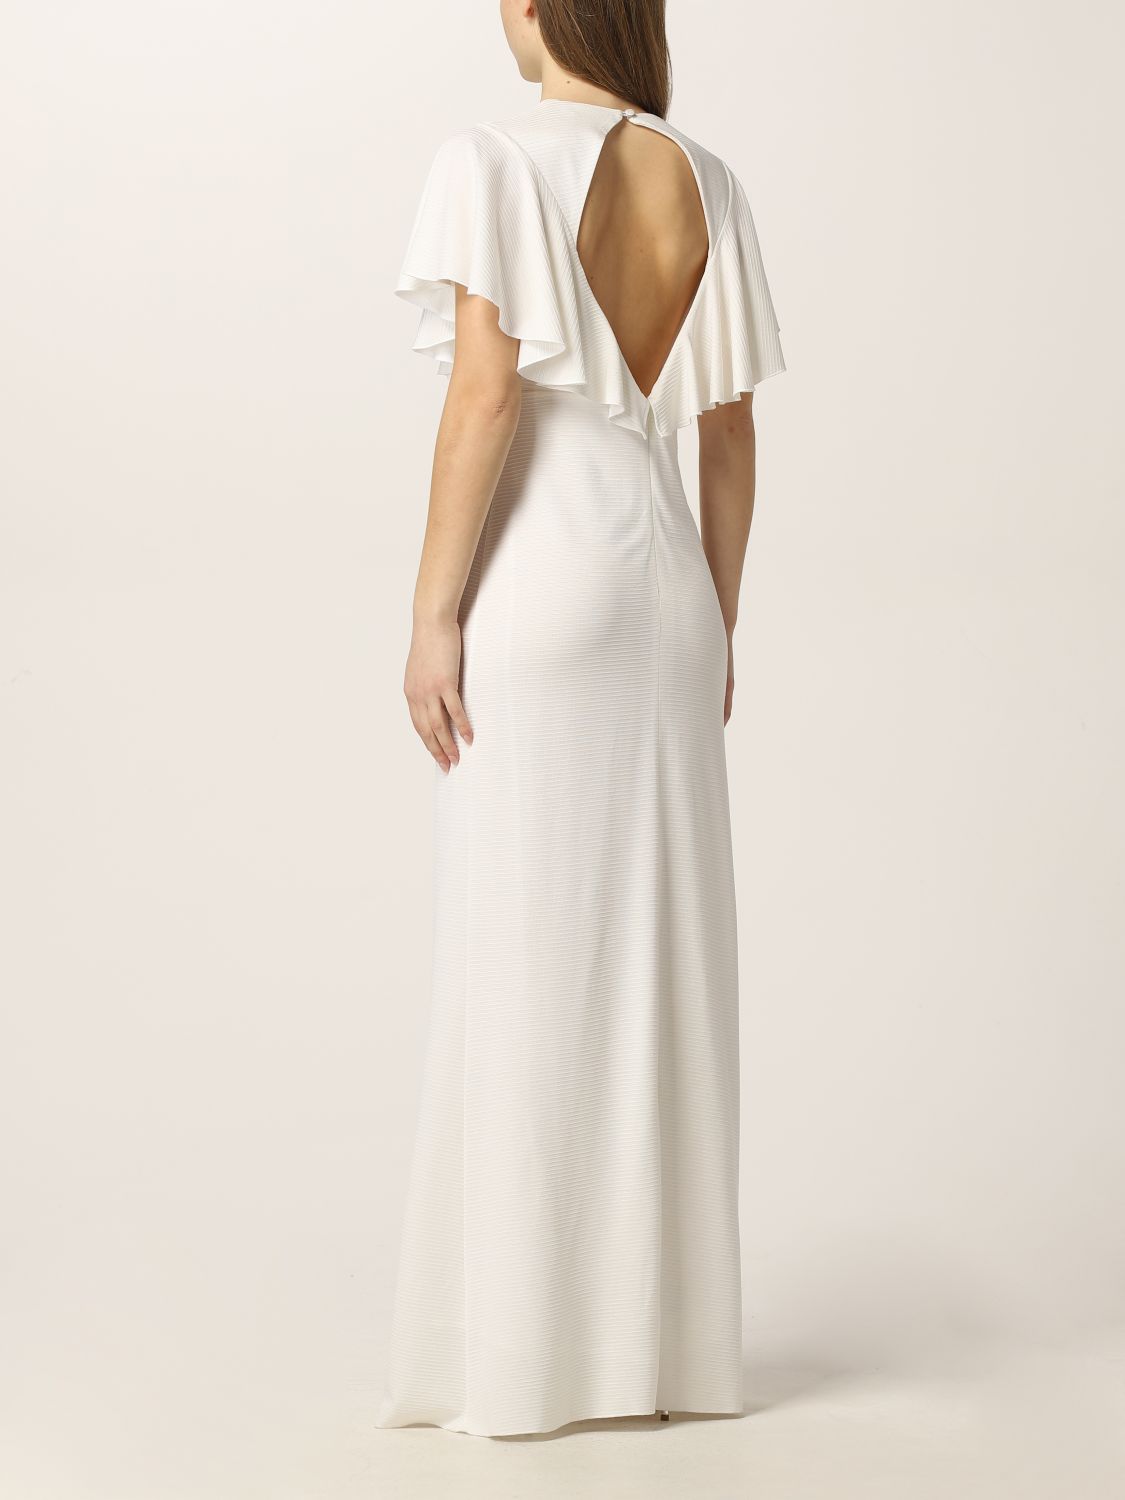 Dress Vanessa Cocchiaro: Vanessa Cocchiaro dress for woman white 2